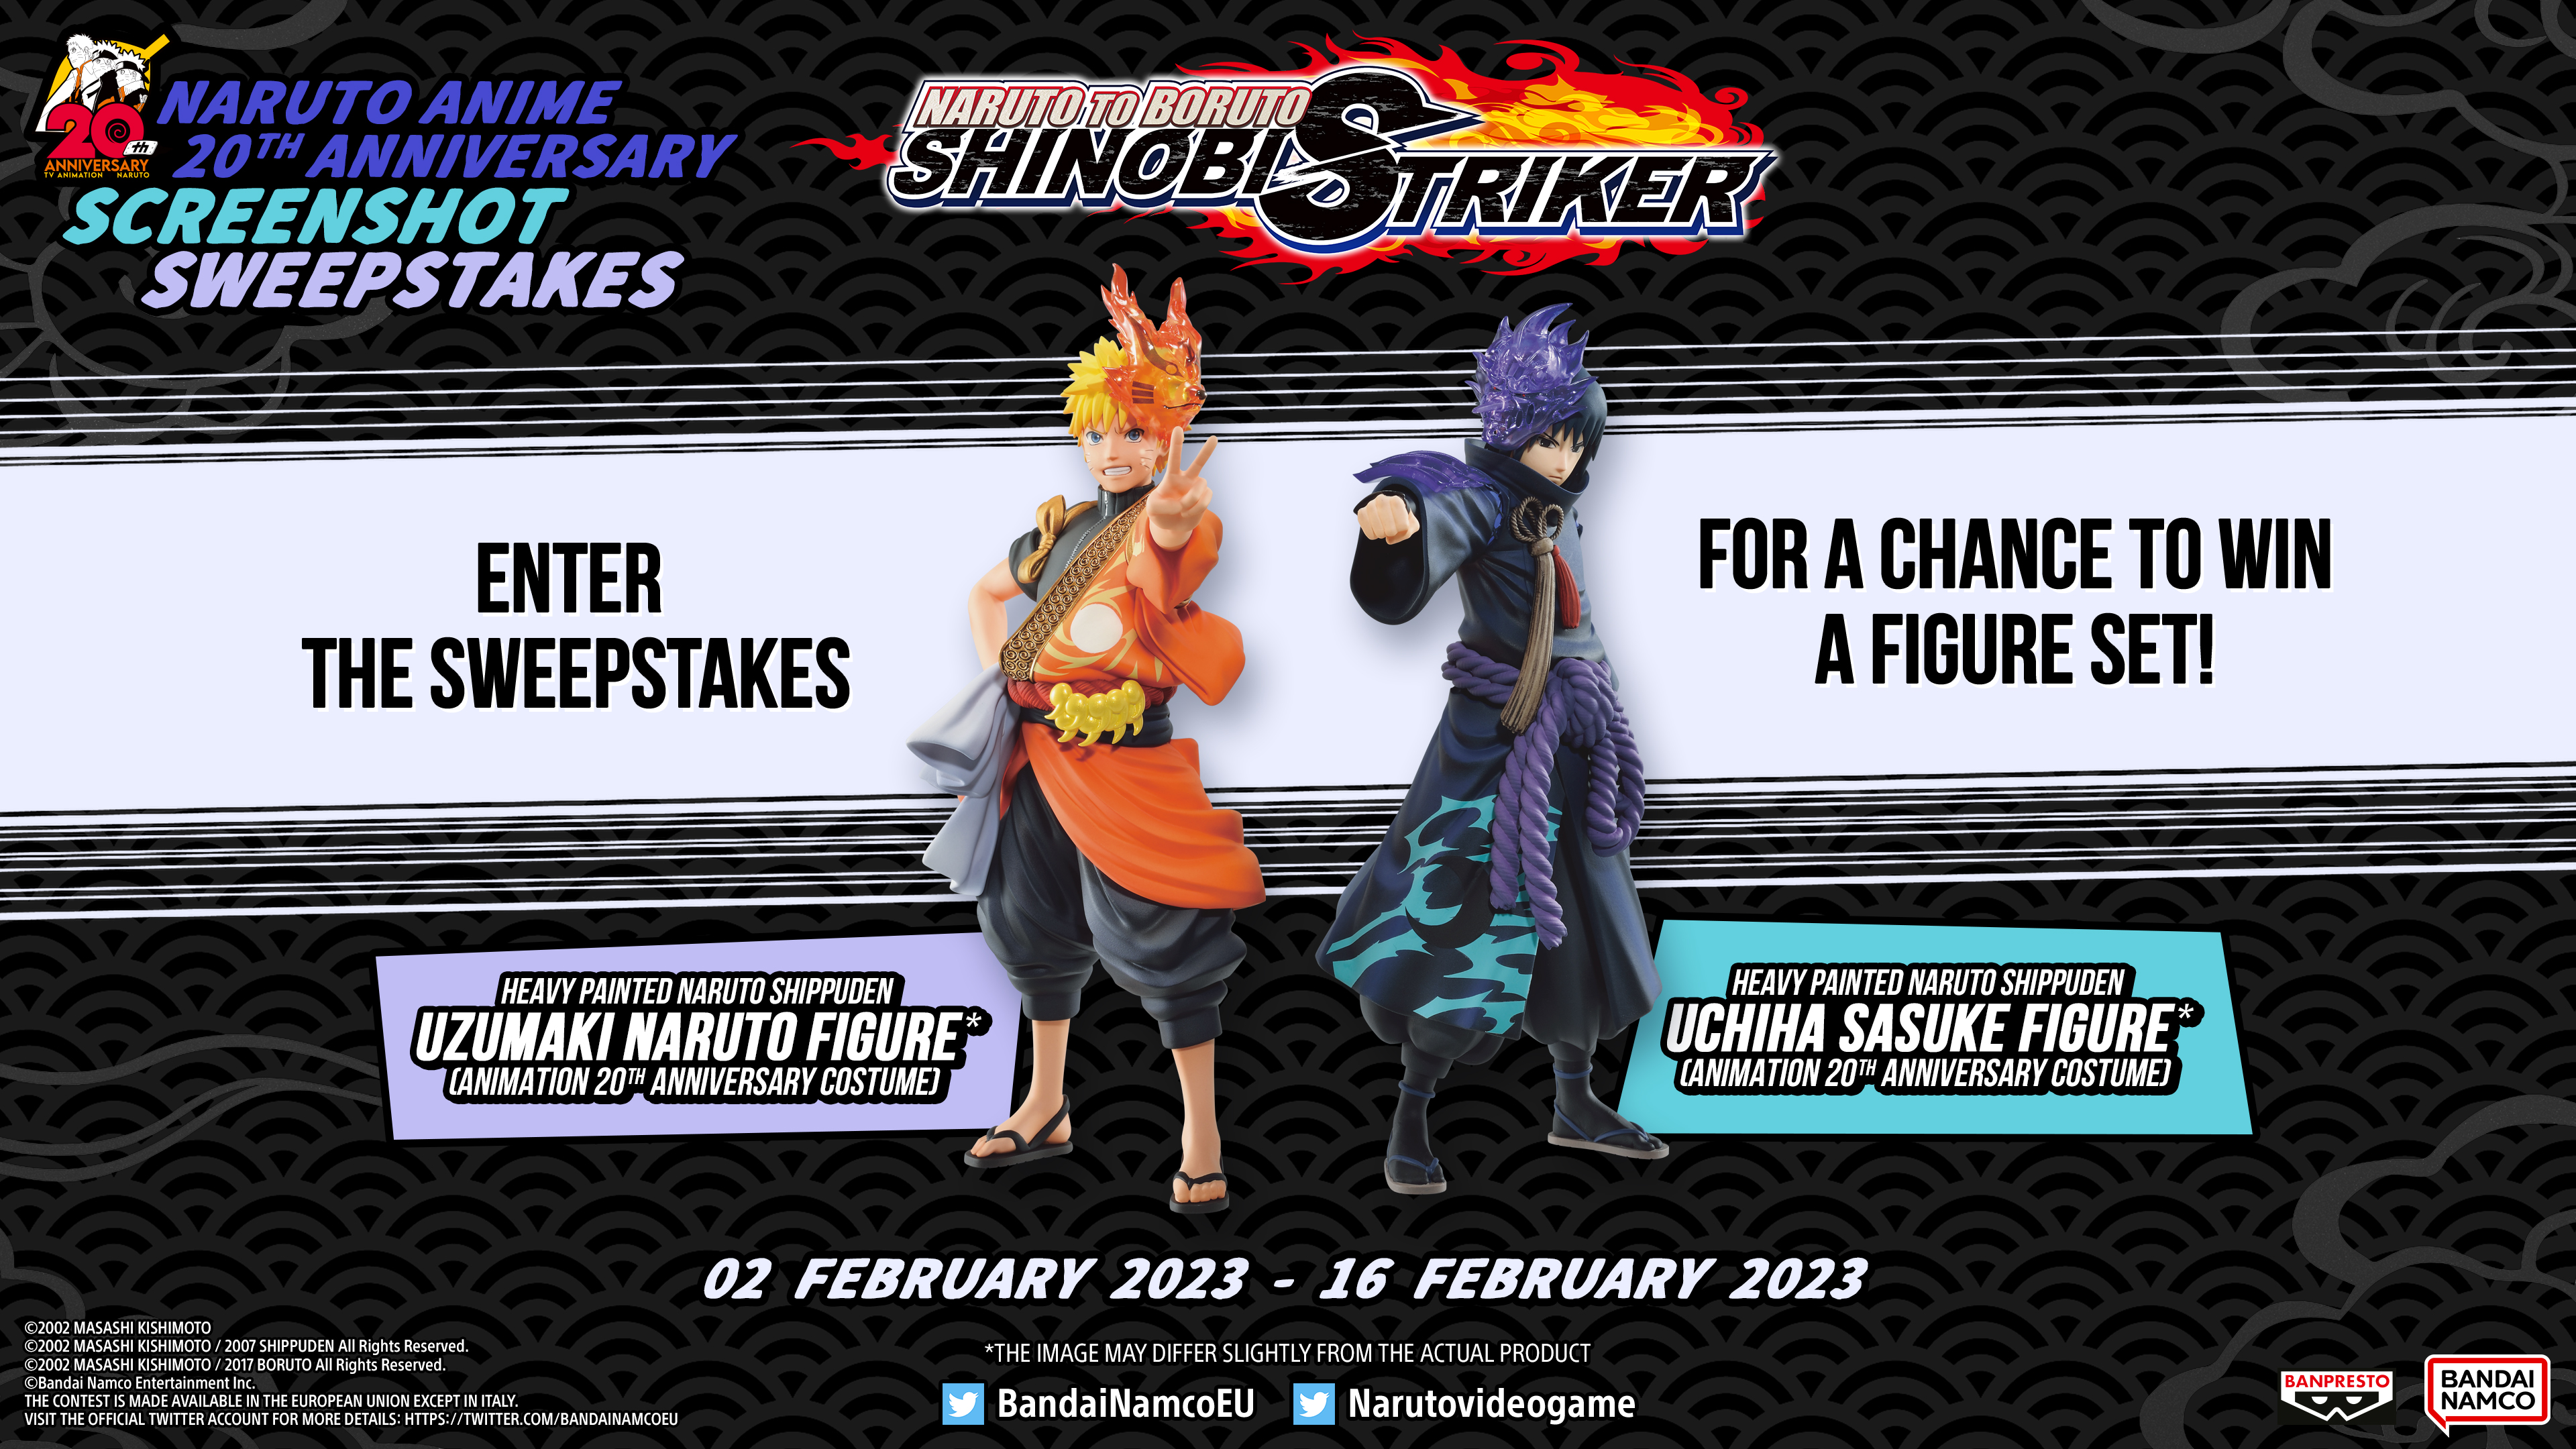 Bandai Namco Europe on X: The NARUTO 20th ANNIVERSARY Sweepstakes is going  live! From Feb 2nd to Feb 16th 2023, get a chance to win a Naruto Figure  Set. - Follow @BandaiNamcoEU